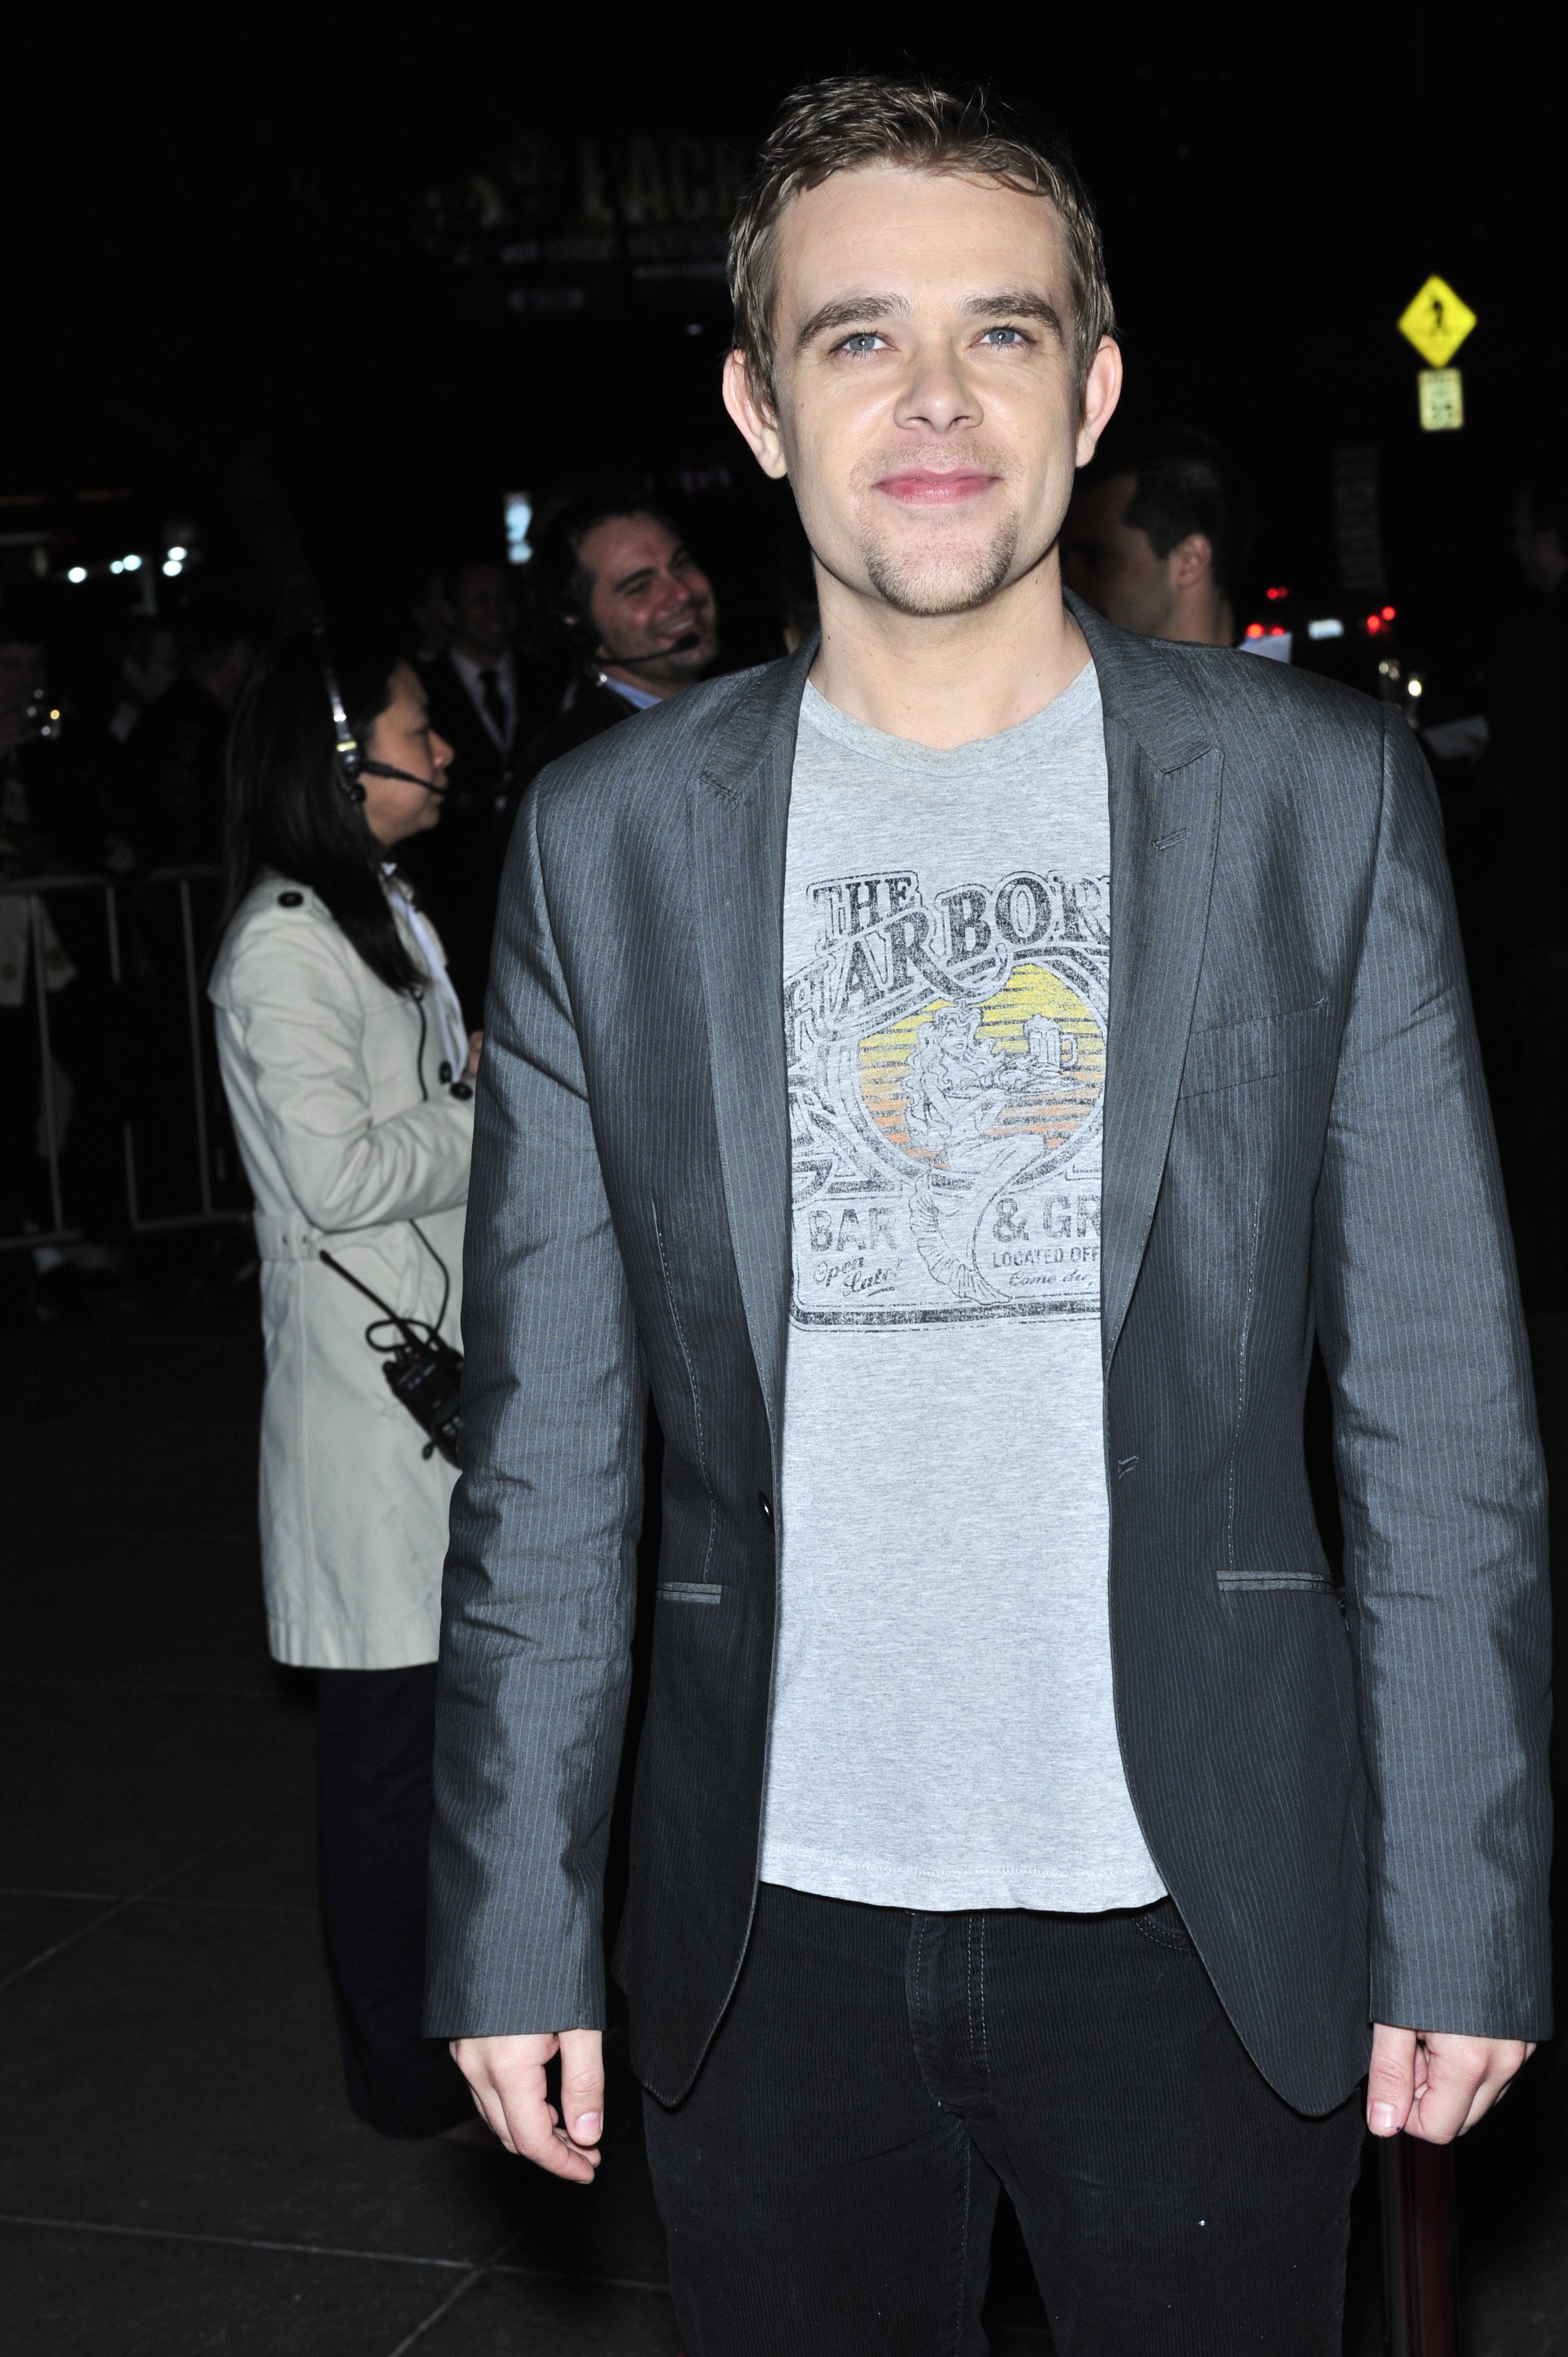 Actor Nick Stahl at the premiere of the movie "Sleepwalking" at the Directors Guild of America Theatre, West Hollywood. March 6, 2008 Los Angeles, California | Photo: Shutterstock